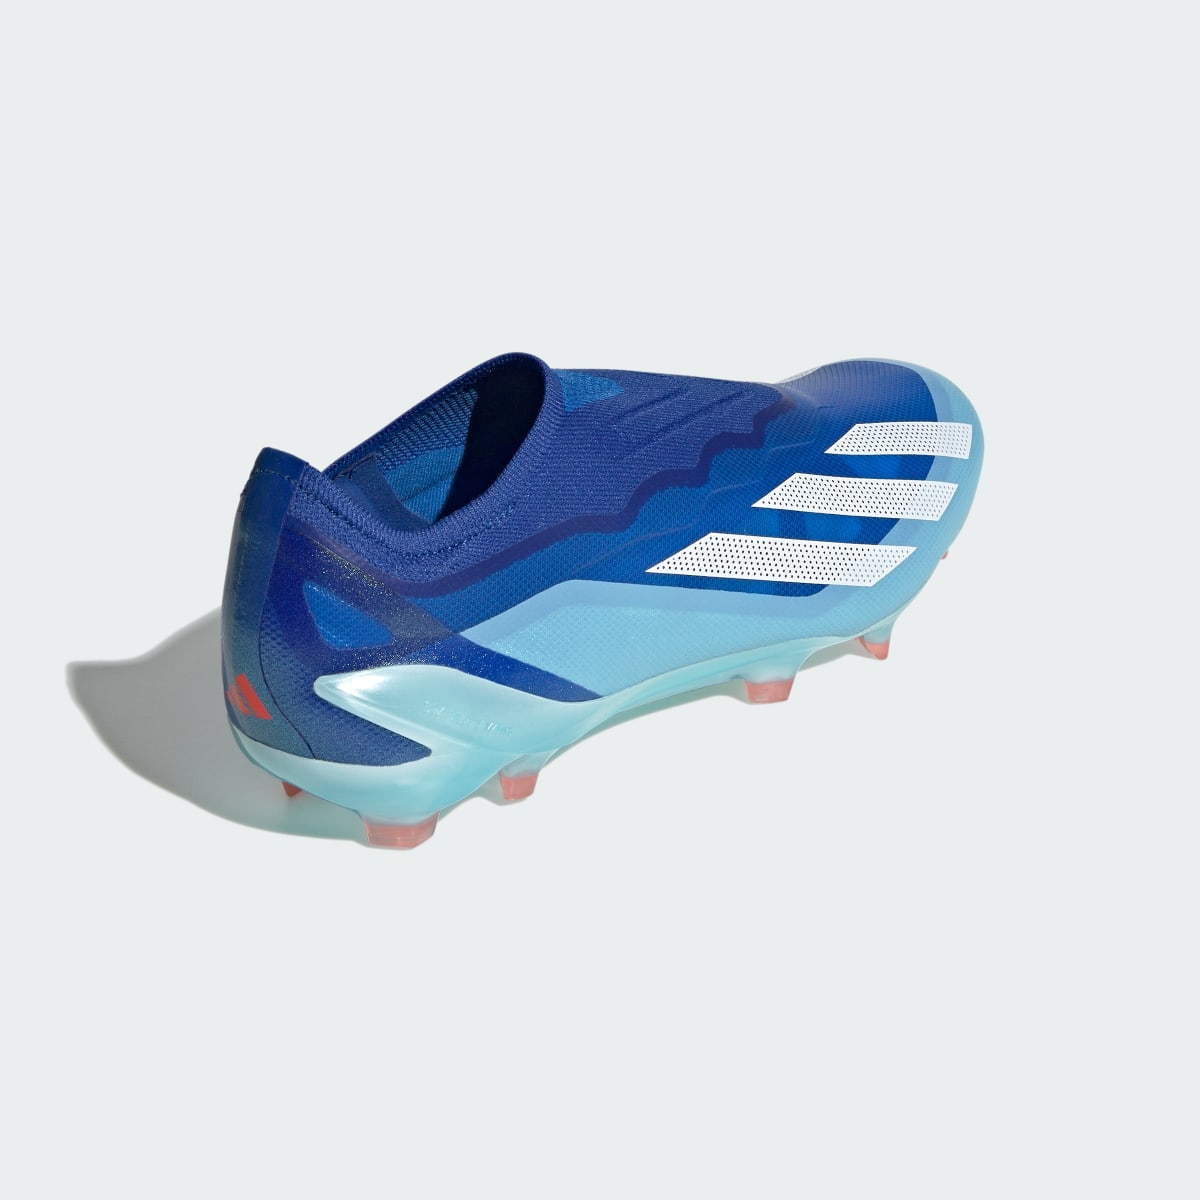 Adidas X Crazyfast.1 Laceless Firm Ground Soccer Cleats. 6